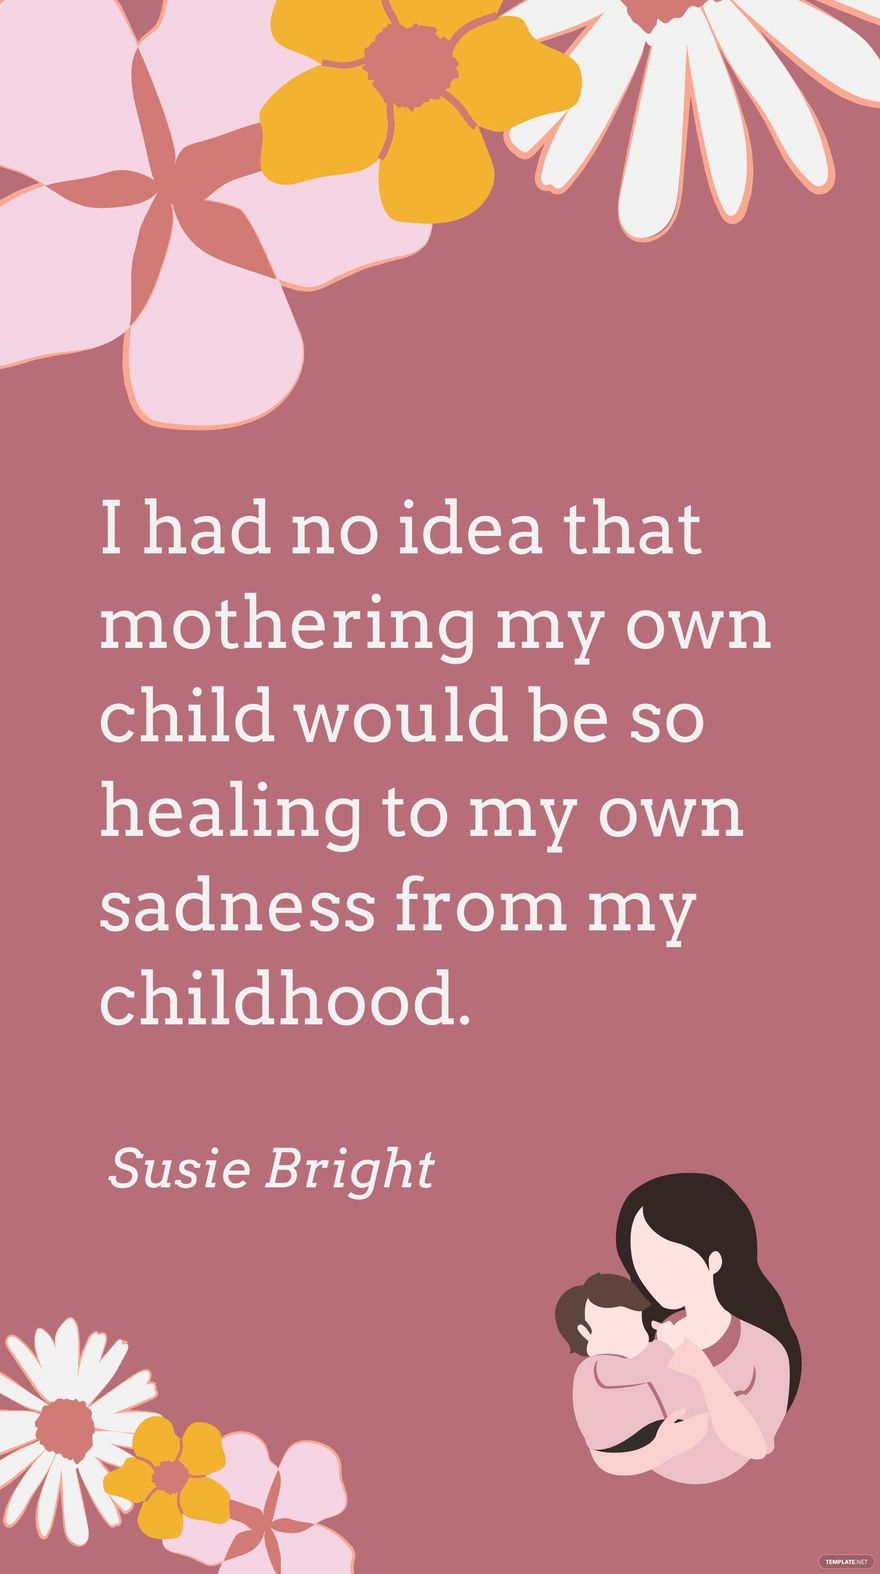 Free Susie Bright - I had no idea that mothering my own child would be so healing to my own sadness from my childhood. in JPG